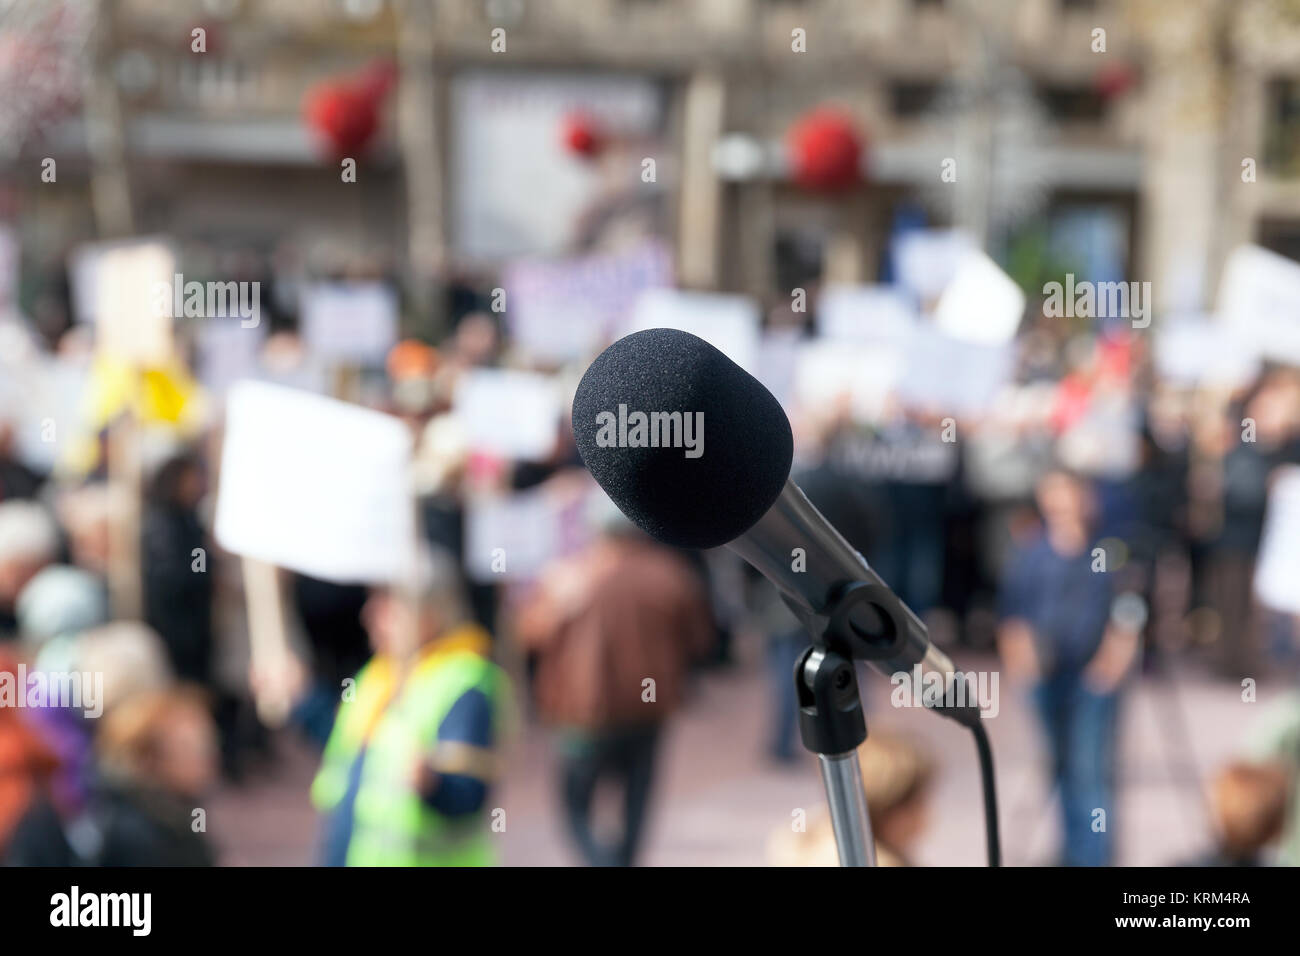 Protest. Public demonstration. Stock Photo